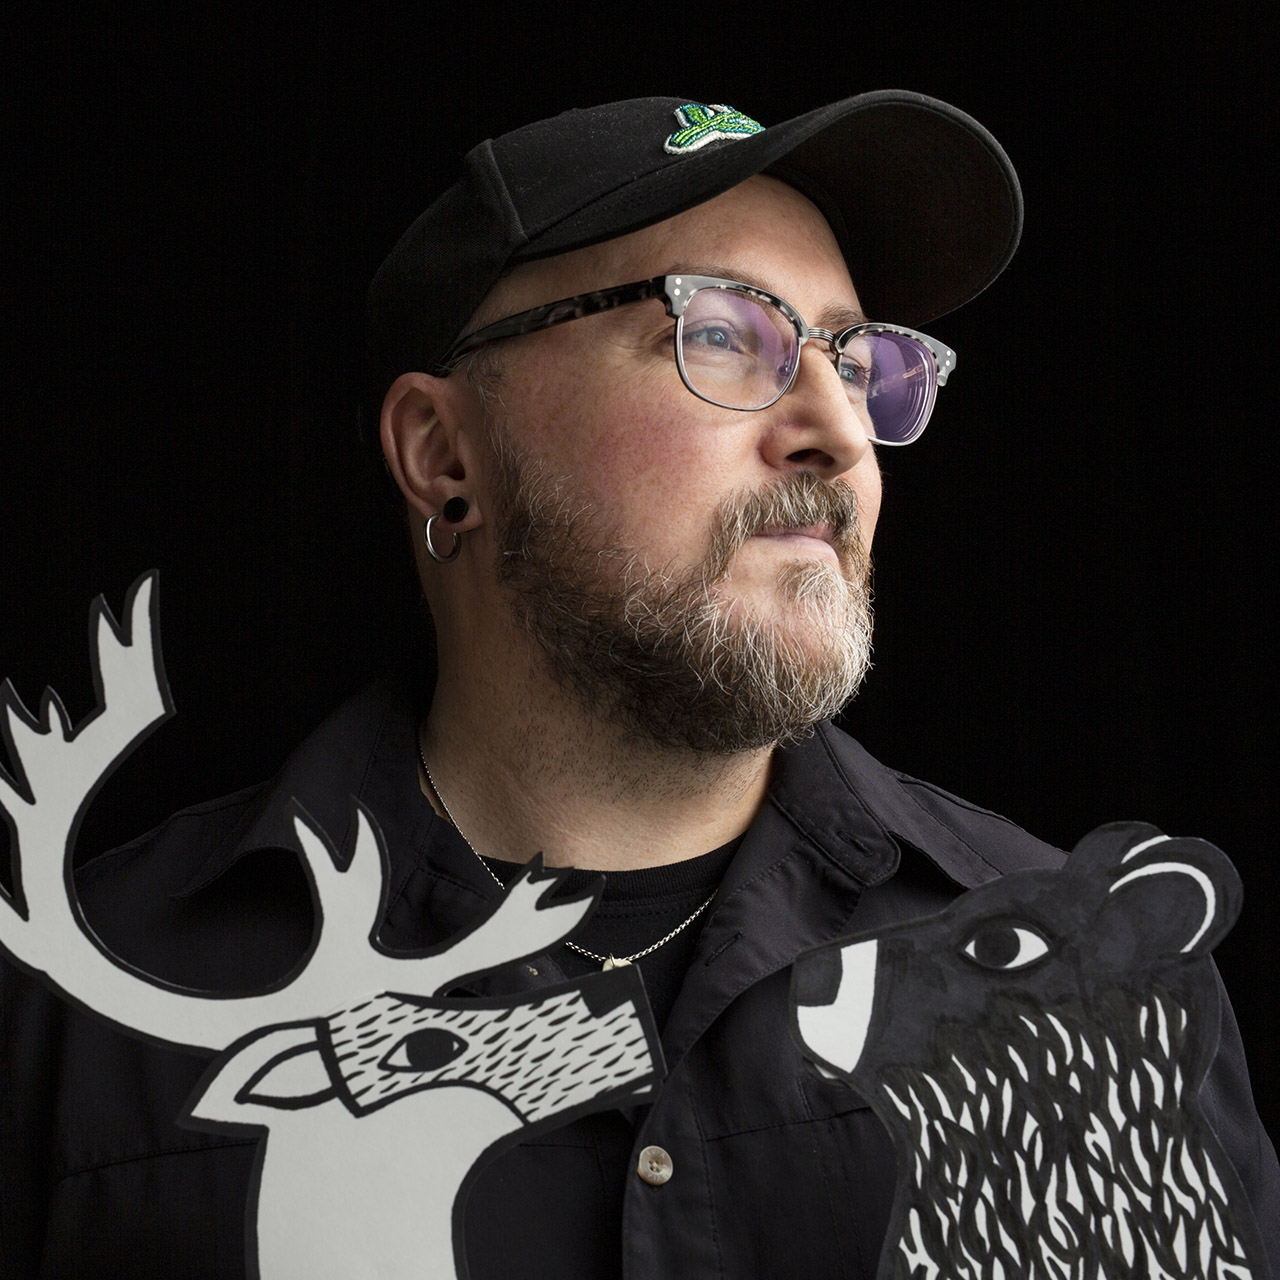 A portrait photograph of Glen Gear. He wears all black, a baseball cap, and rimmed glasses while facing 3/4 away from the camera. Two black and white illustrations of forest animals, a deer and a bear, are overlayed at the bottom of the photo